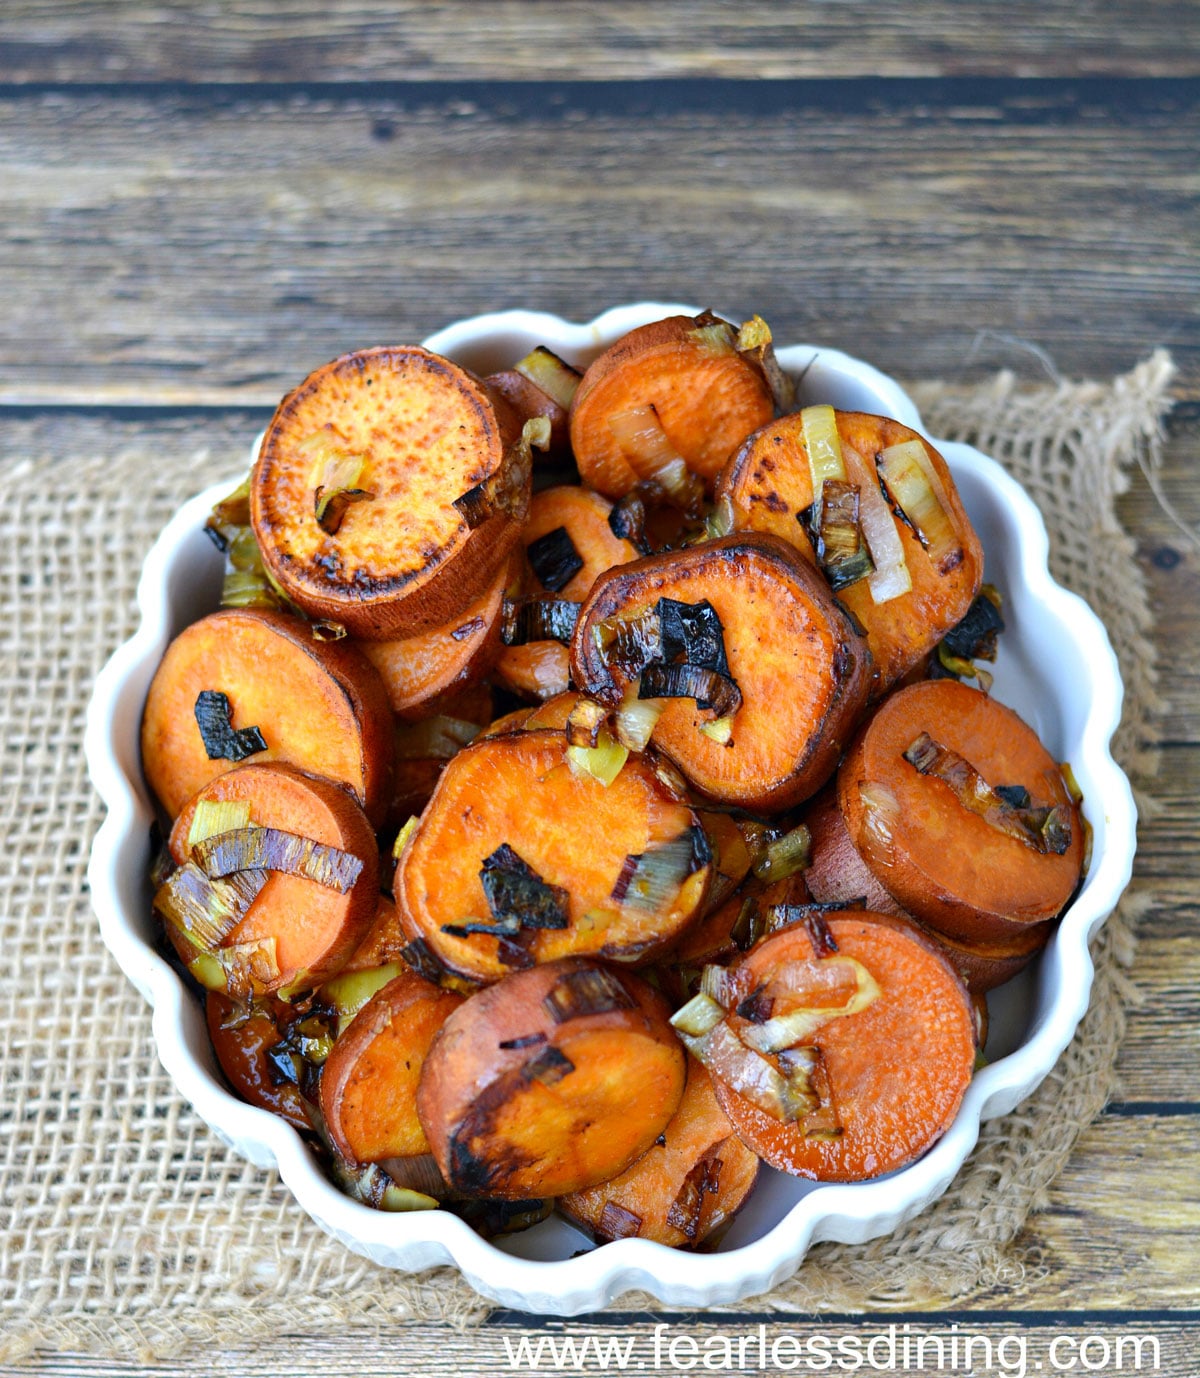 A white bowl filled with pan-fried sweet potato slices.